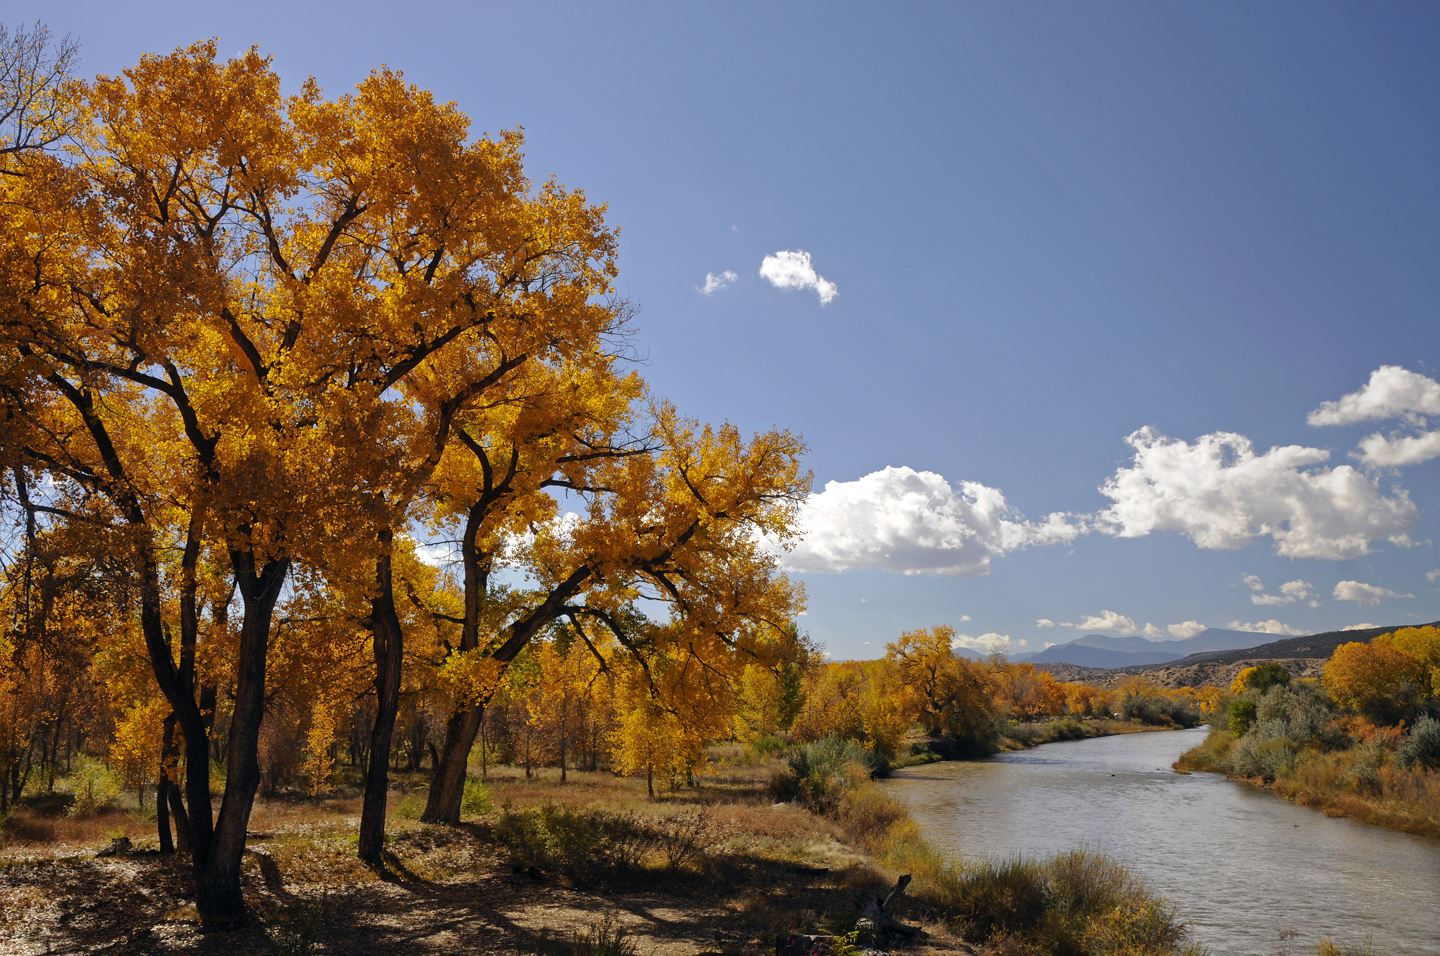 Fall on the Rio Grande at Los Luceros - Photo by Gene Peach